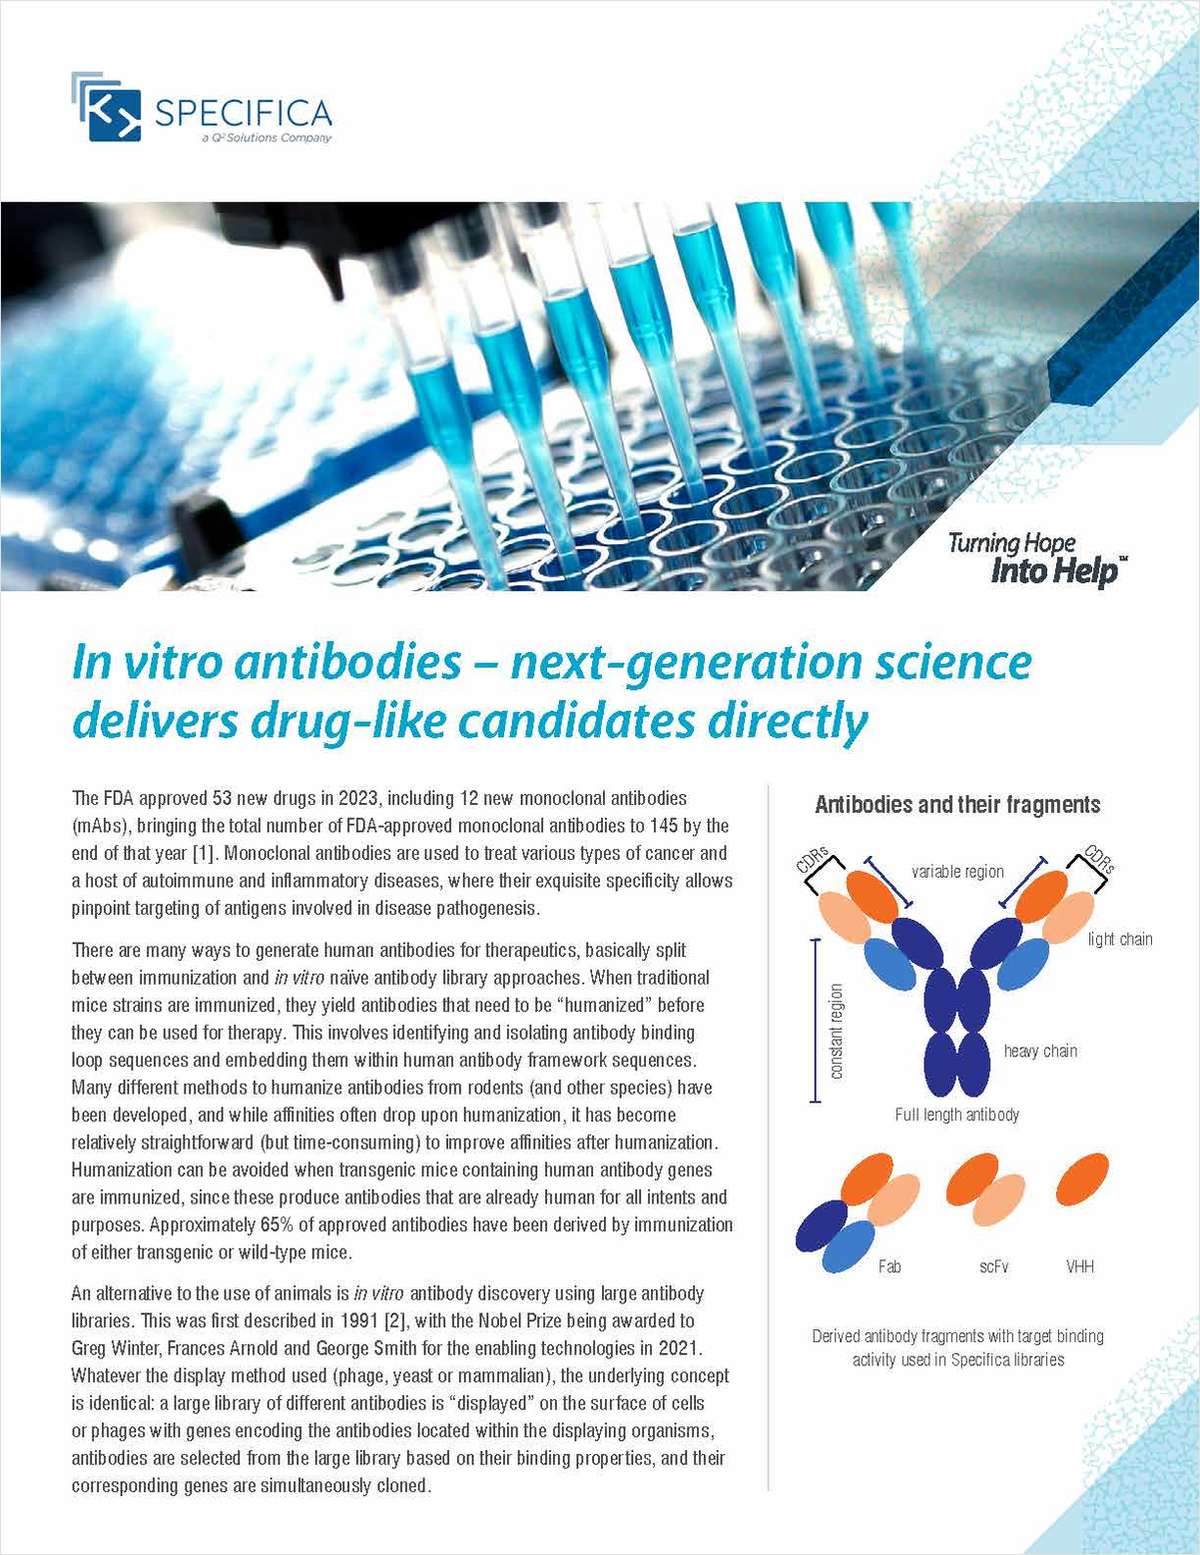 In Vitro Antibodies -- Next-Gen Science Delivers Drug-like Candidates Directly